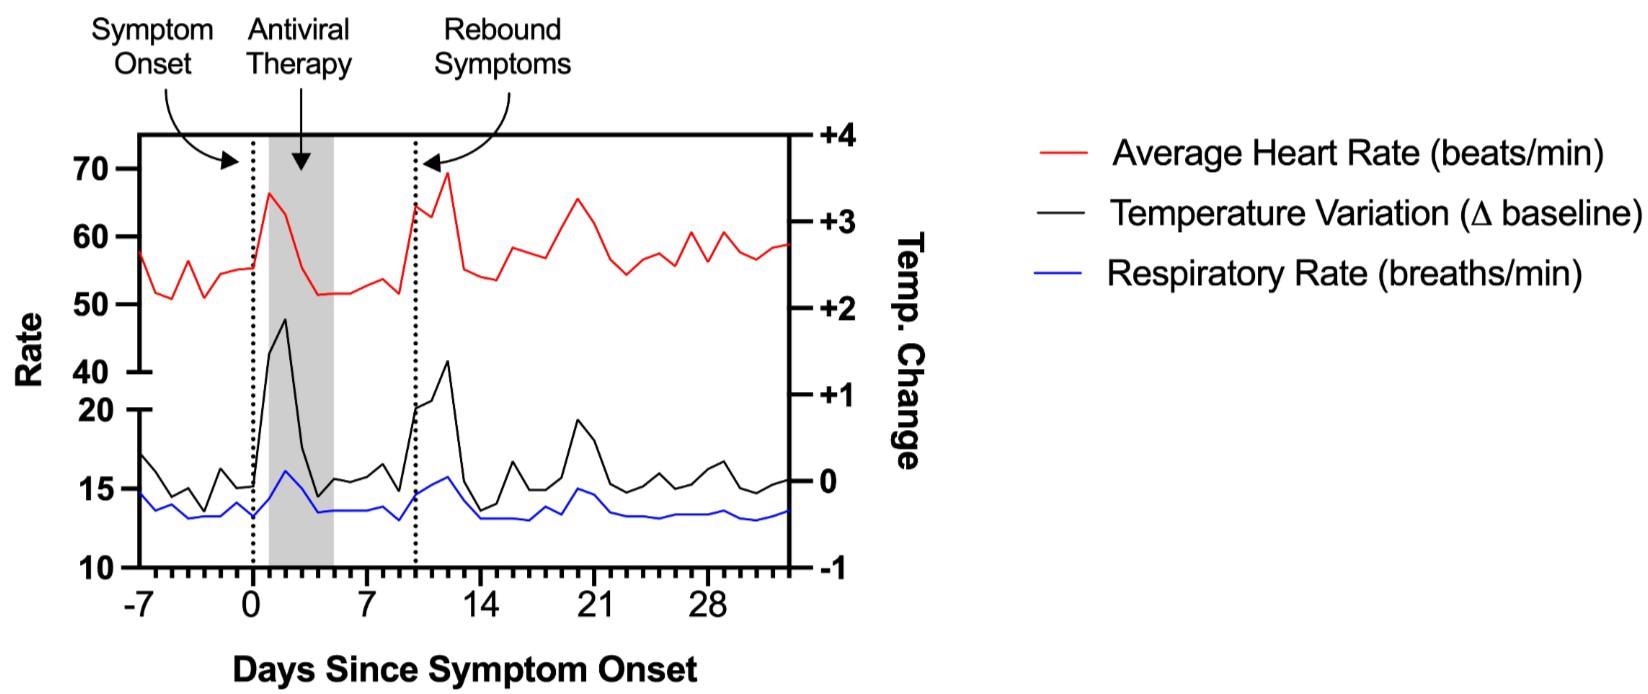 Physiologic measurements as recorded by a personal fitness device used by Patient 1, showing rebound tachycardia, tachypnea, and elevated body temperature coinciding with completion of antiviral therapy.